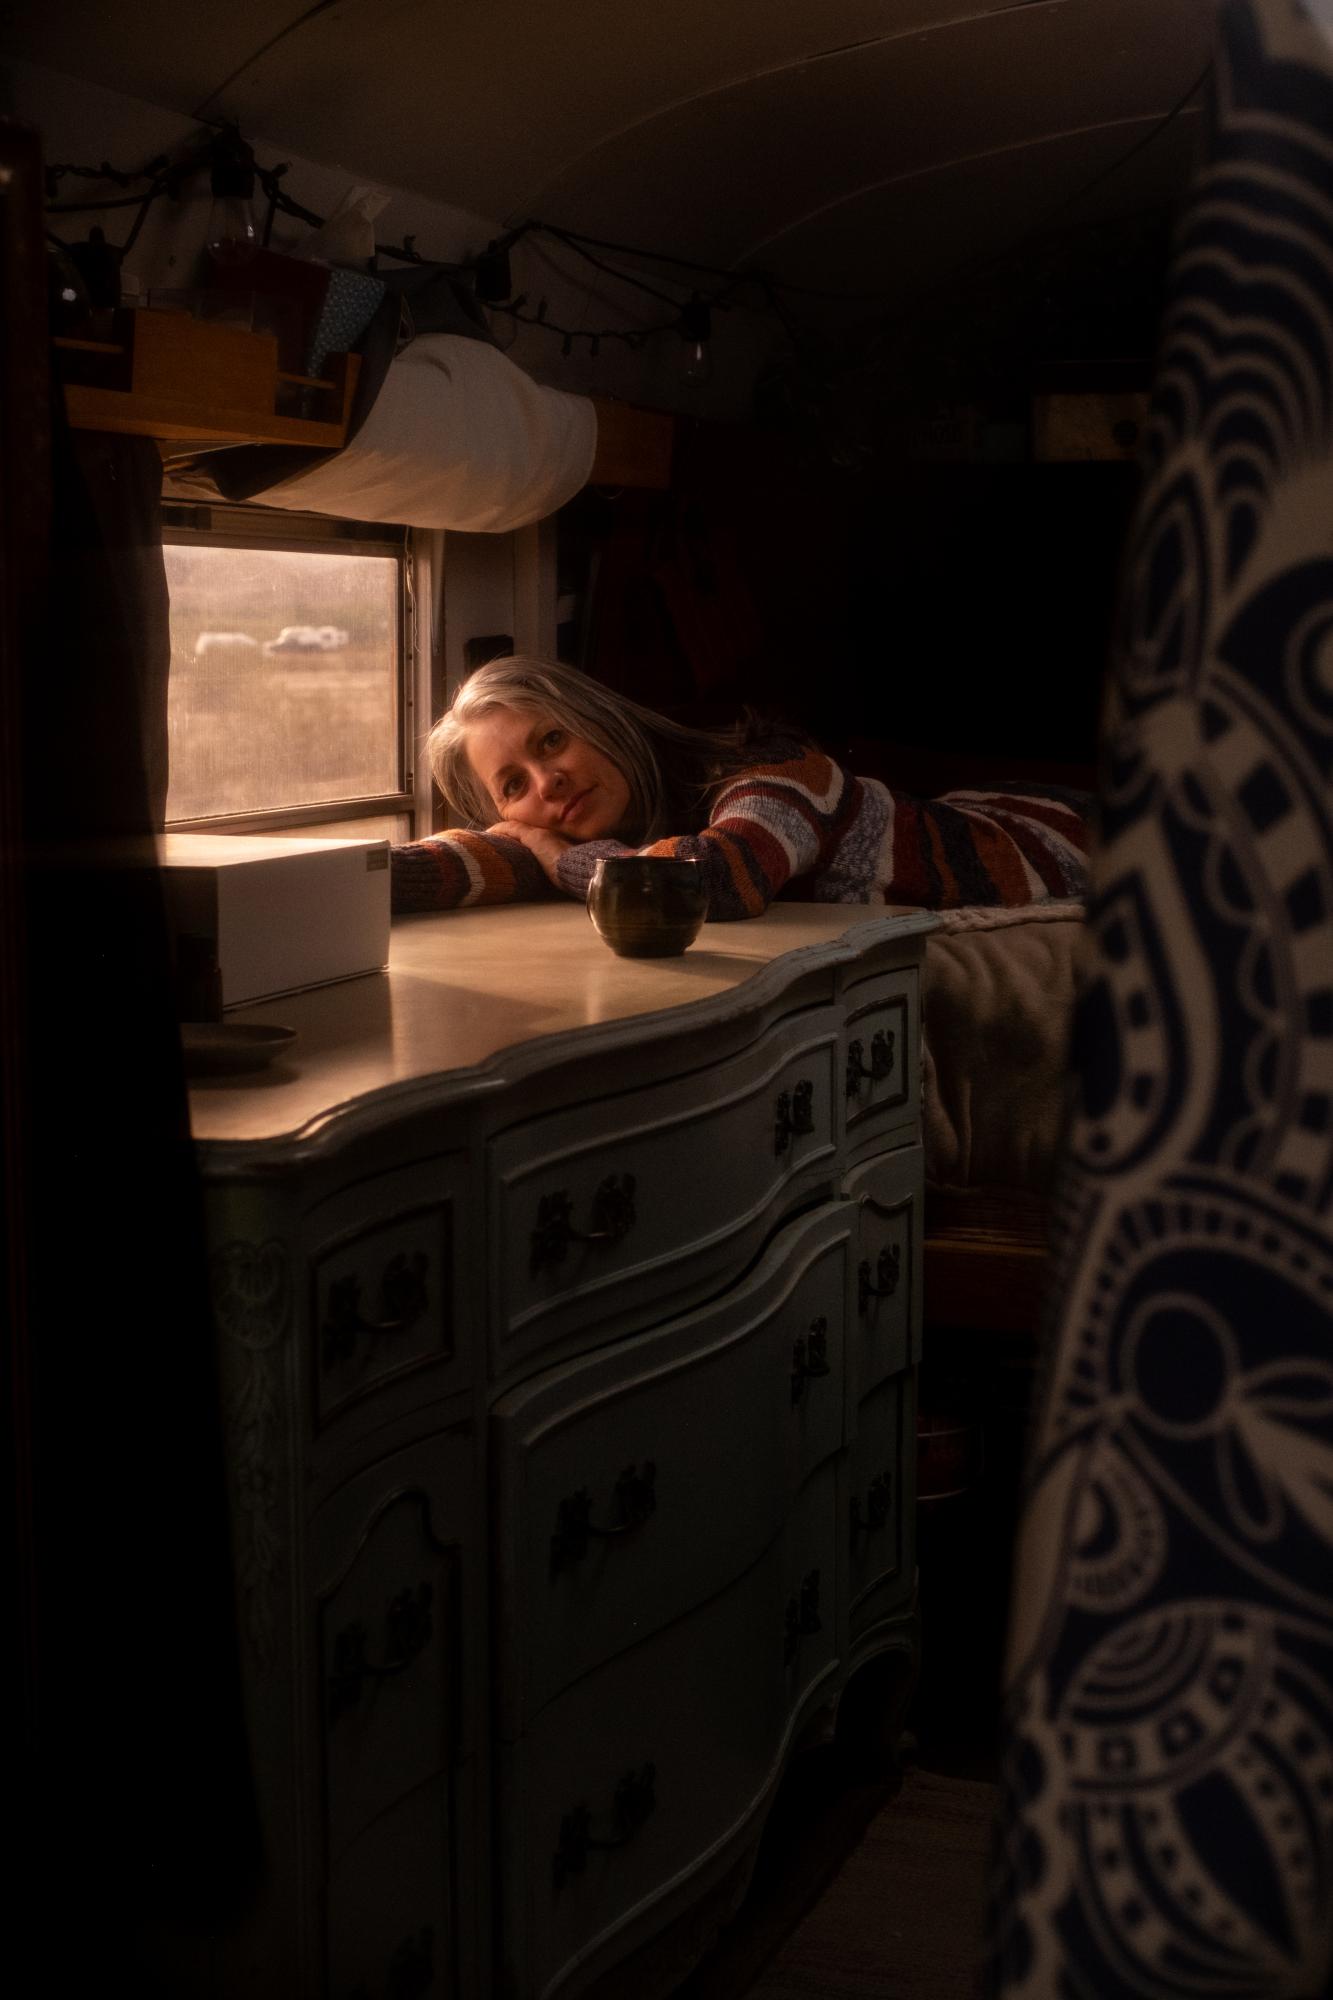 A Warm Winter (An Ongoing Journey) - A portrait of Catherine inside her rig. Quartzsite, Arizona.